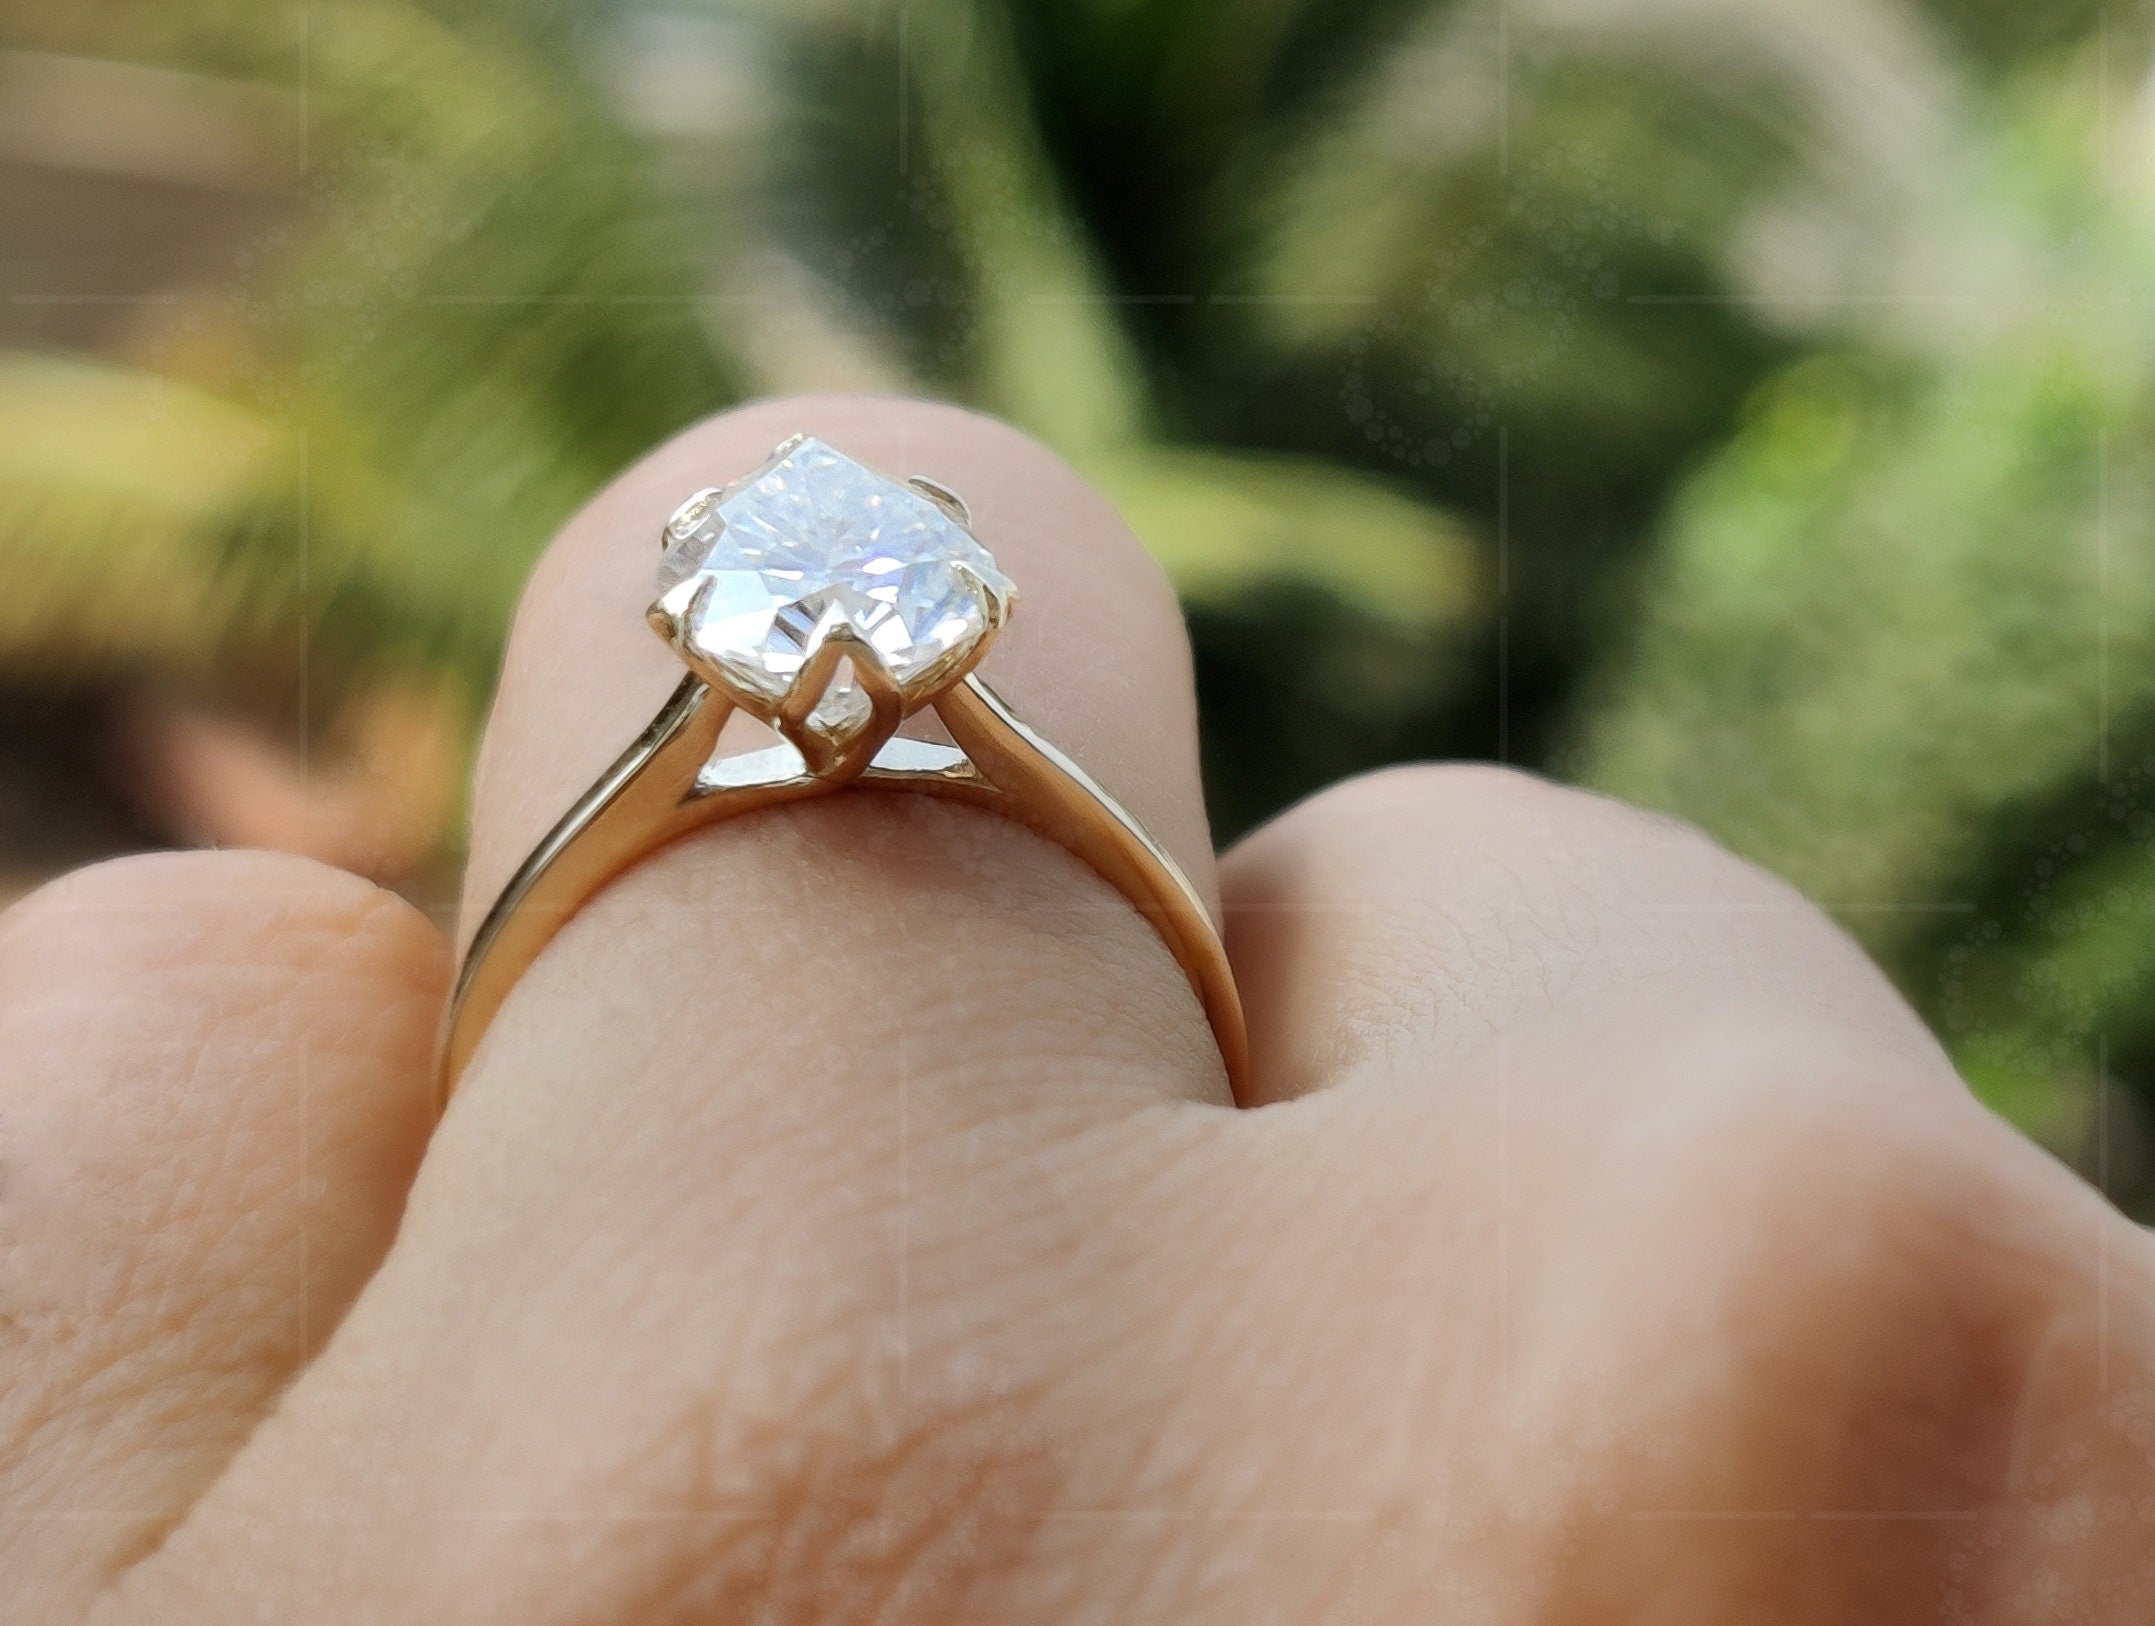 Timeless Beauty: 2 Ct Pear Shaped Moissanite Tulip Setting Ring, a Nature-Inspired Minimalist Engagement Ring